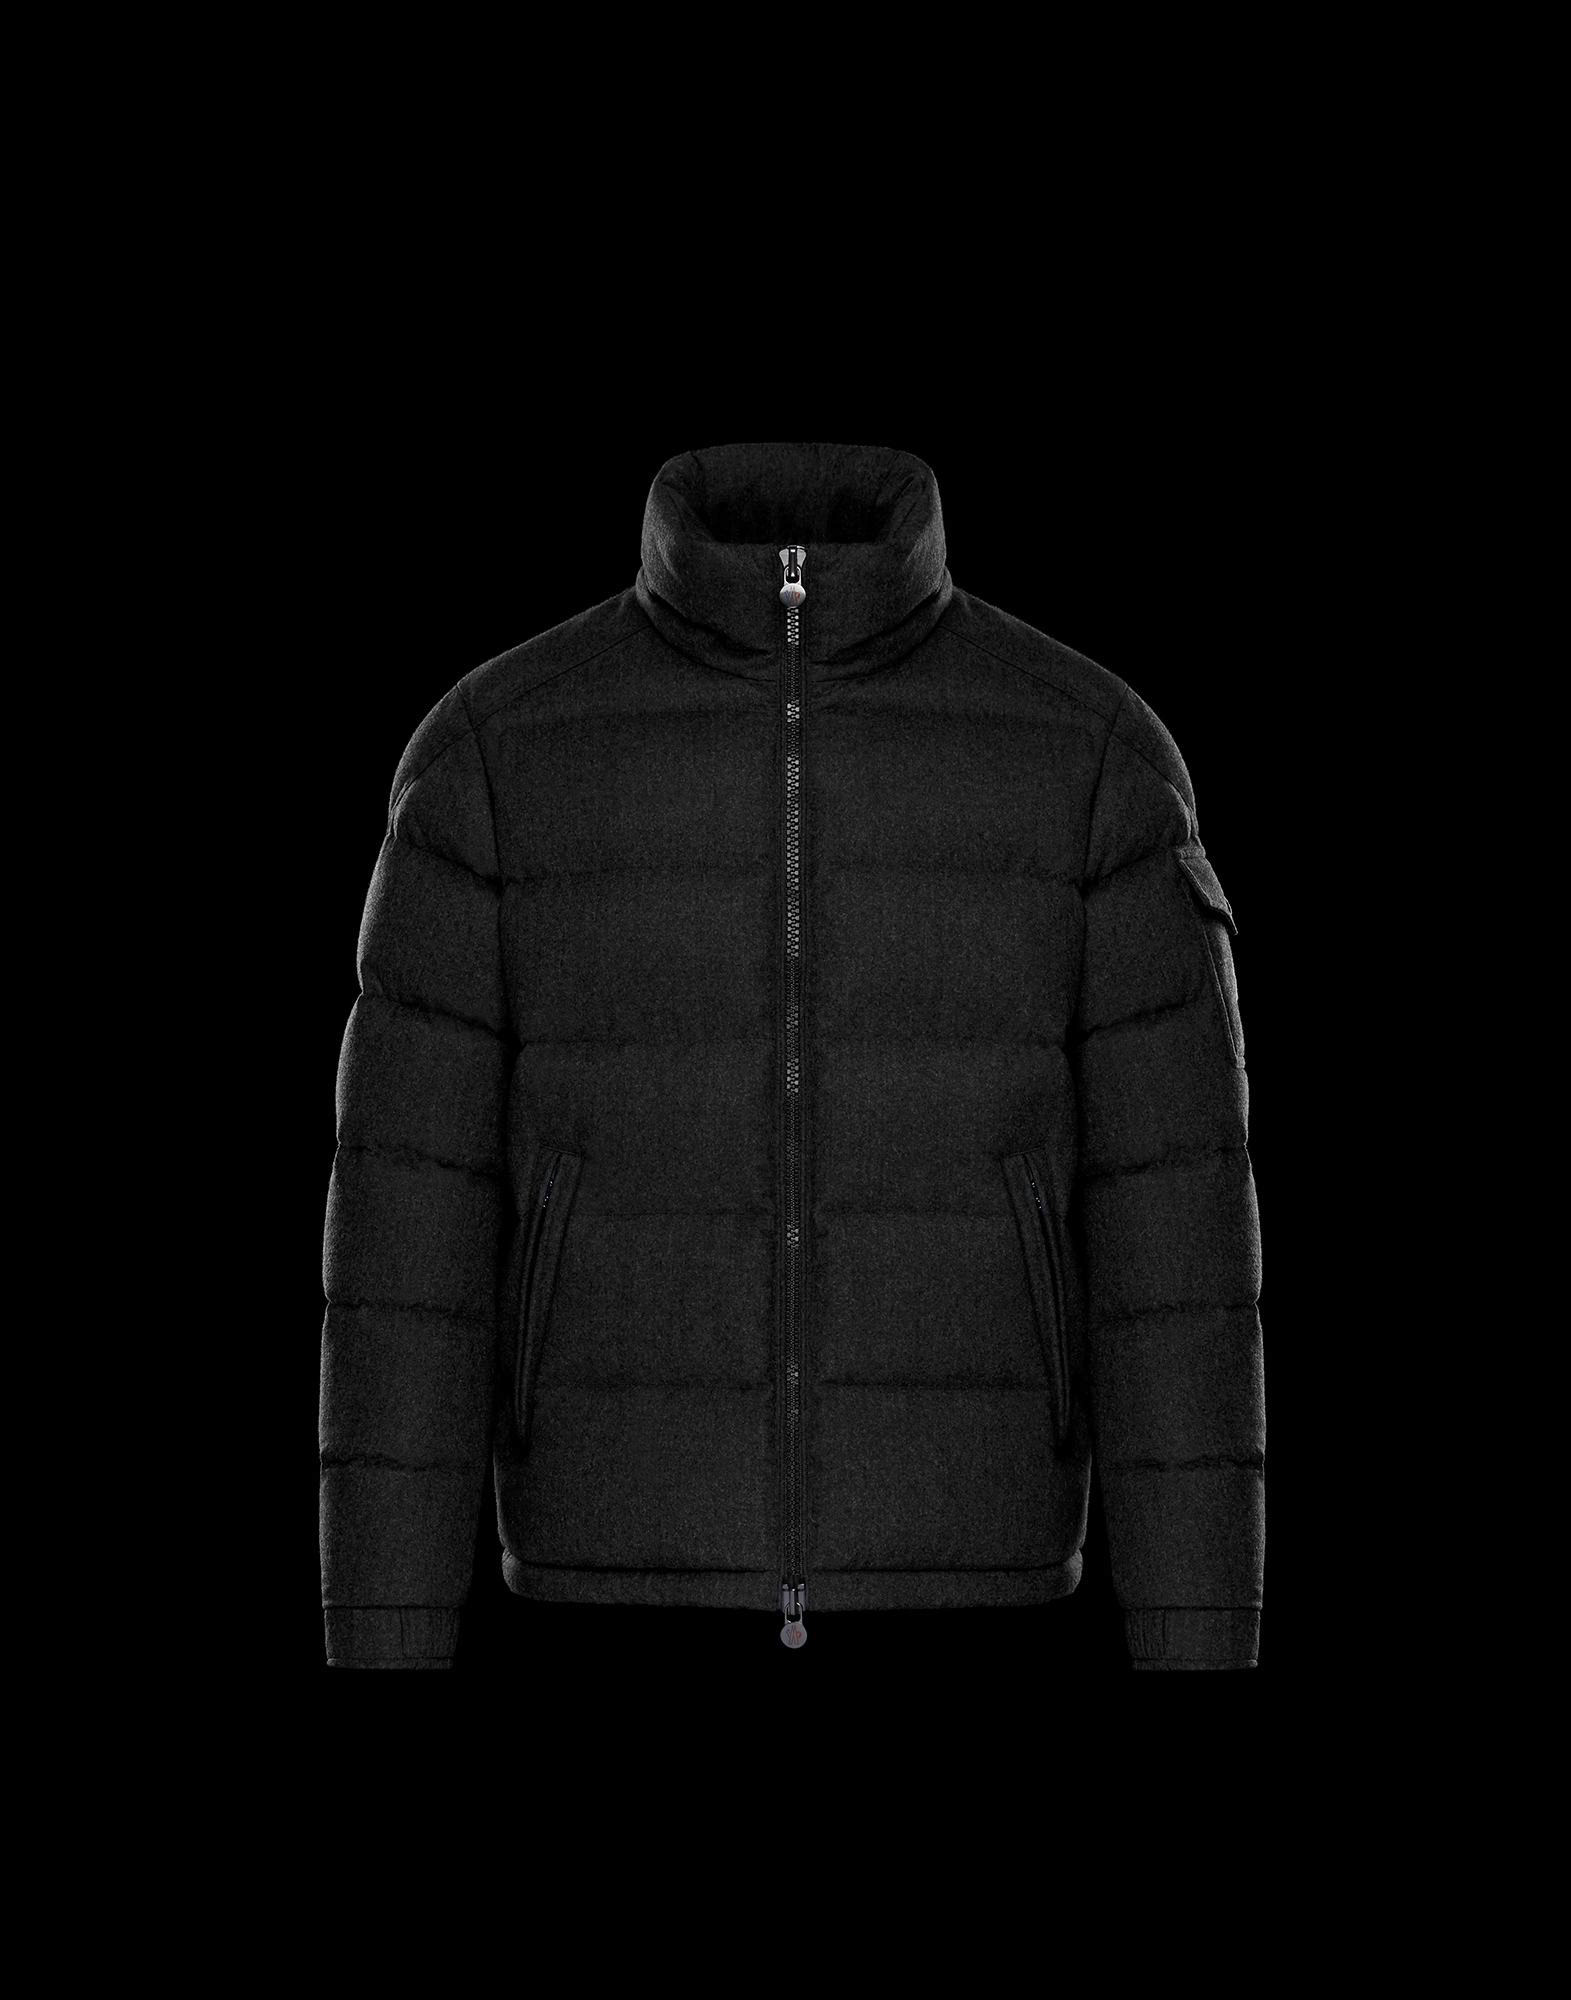 moncler jacket cleaning